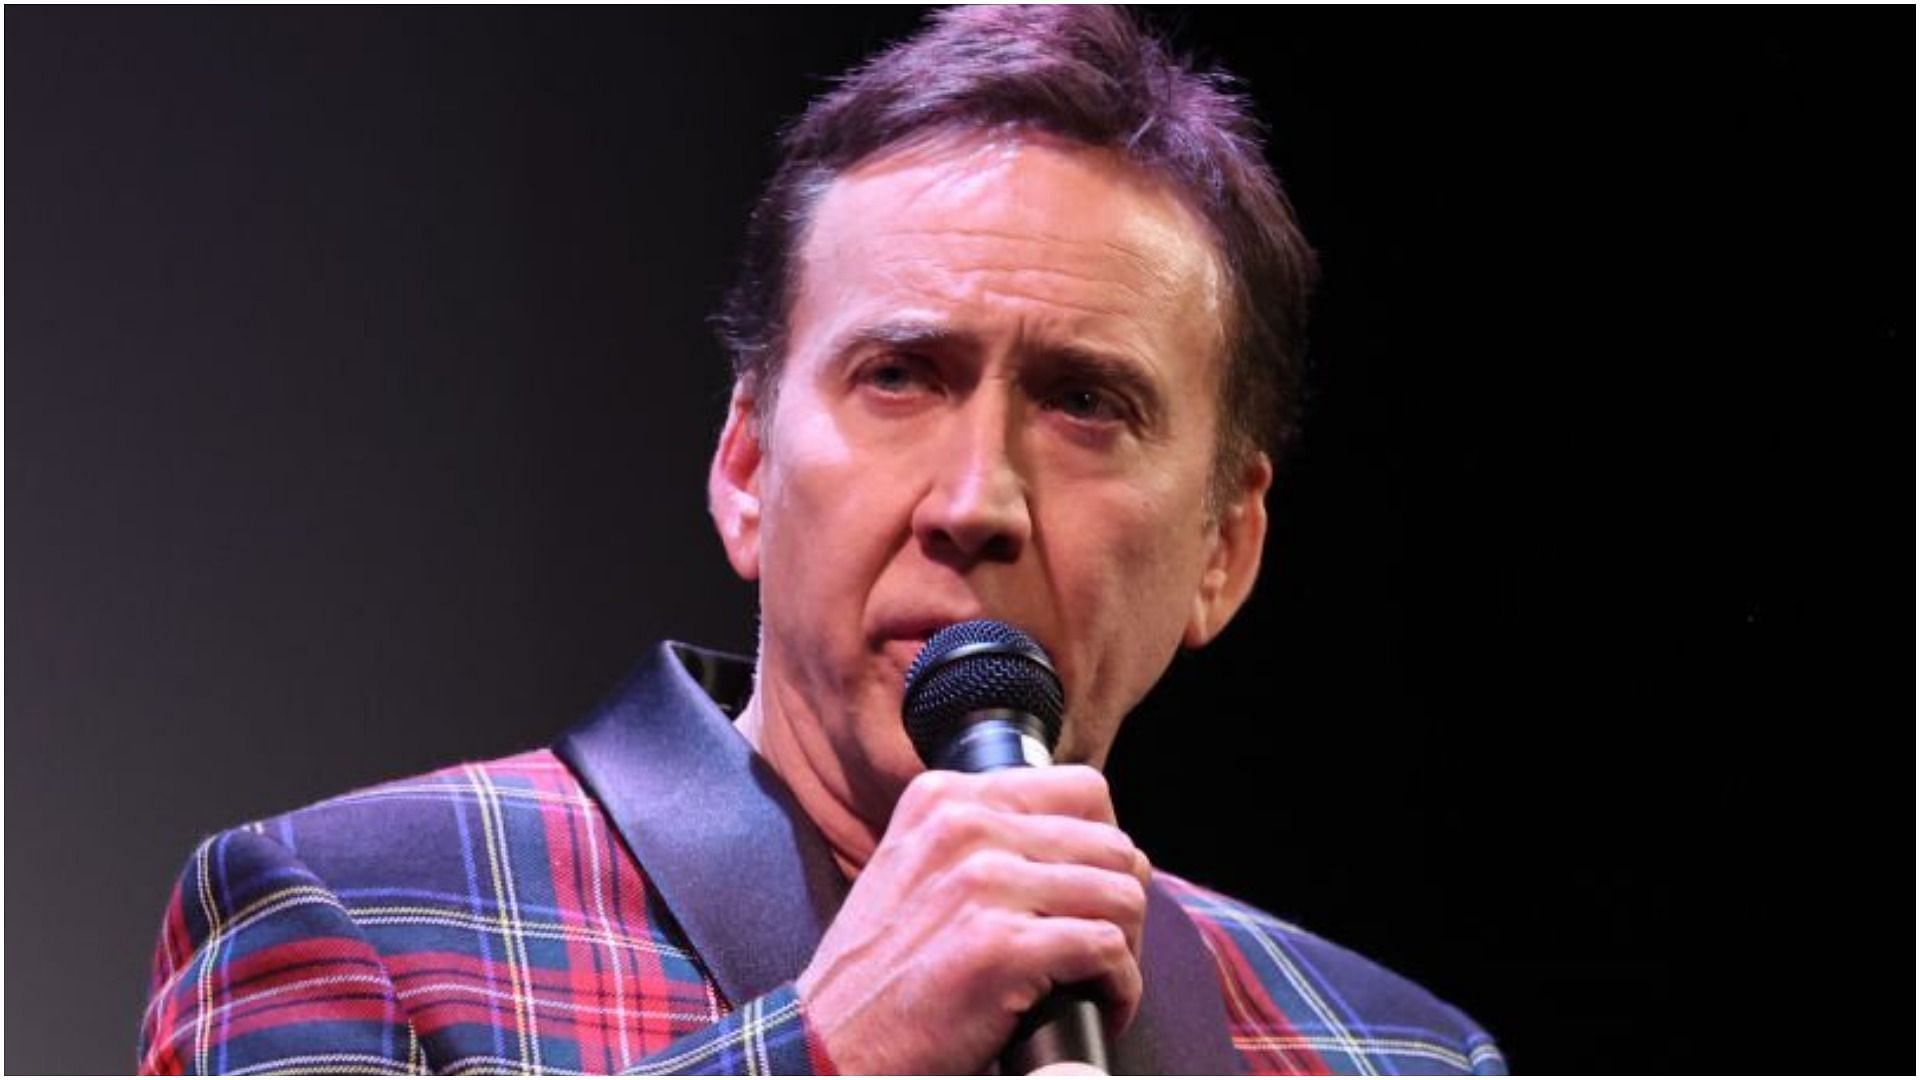 Nicolas Cage recently revealed how he paid off his debts (Image via Rich Fury/Getty Images)